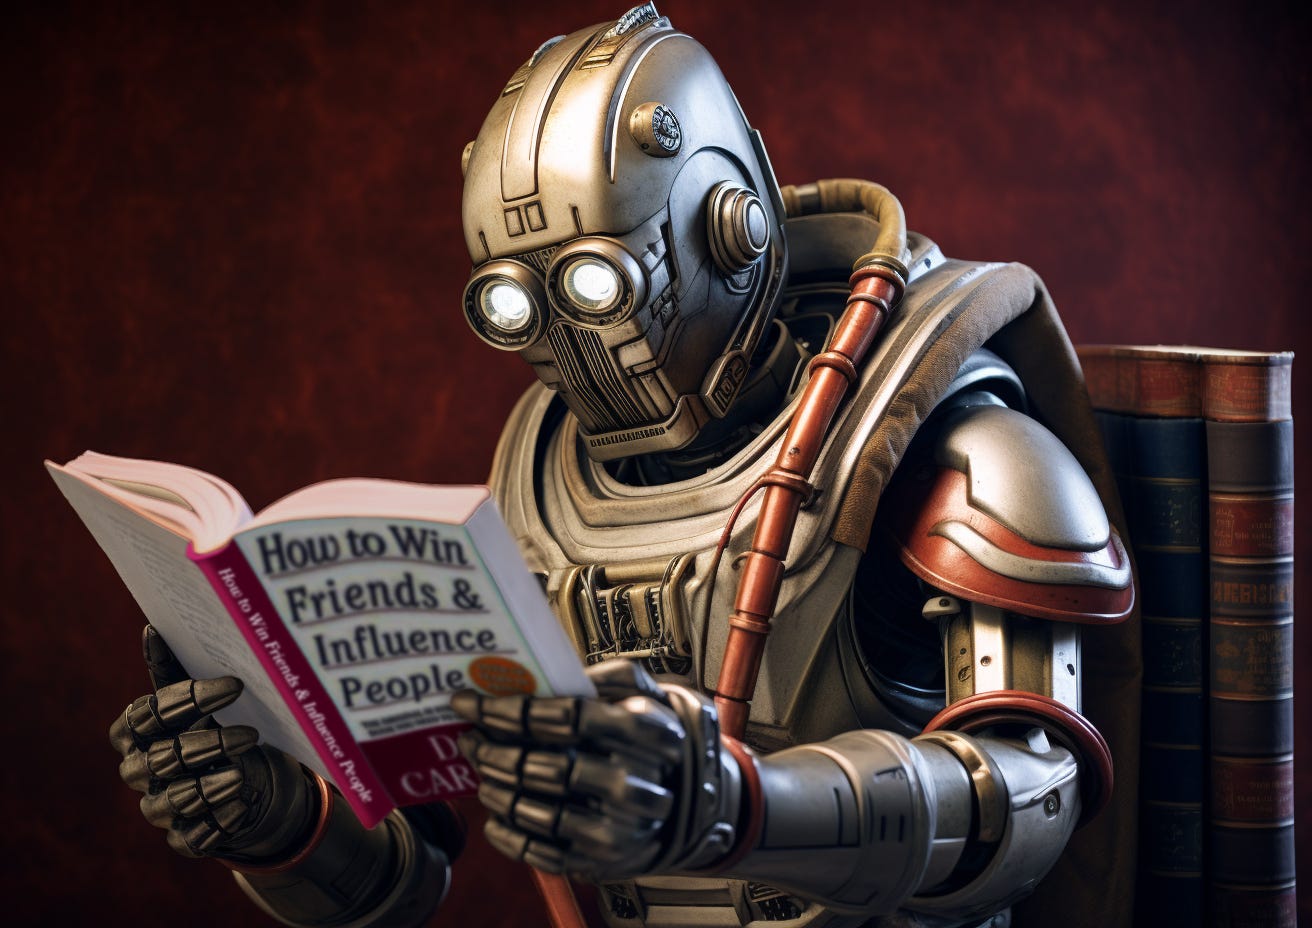 A robot reads How to Win Friends & Influence People by Dale Carnegie